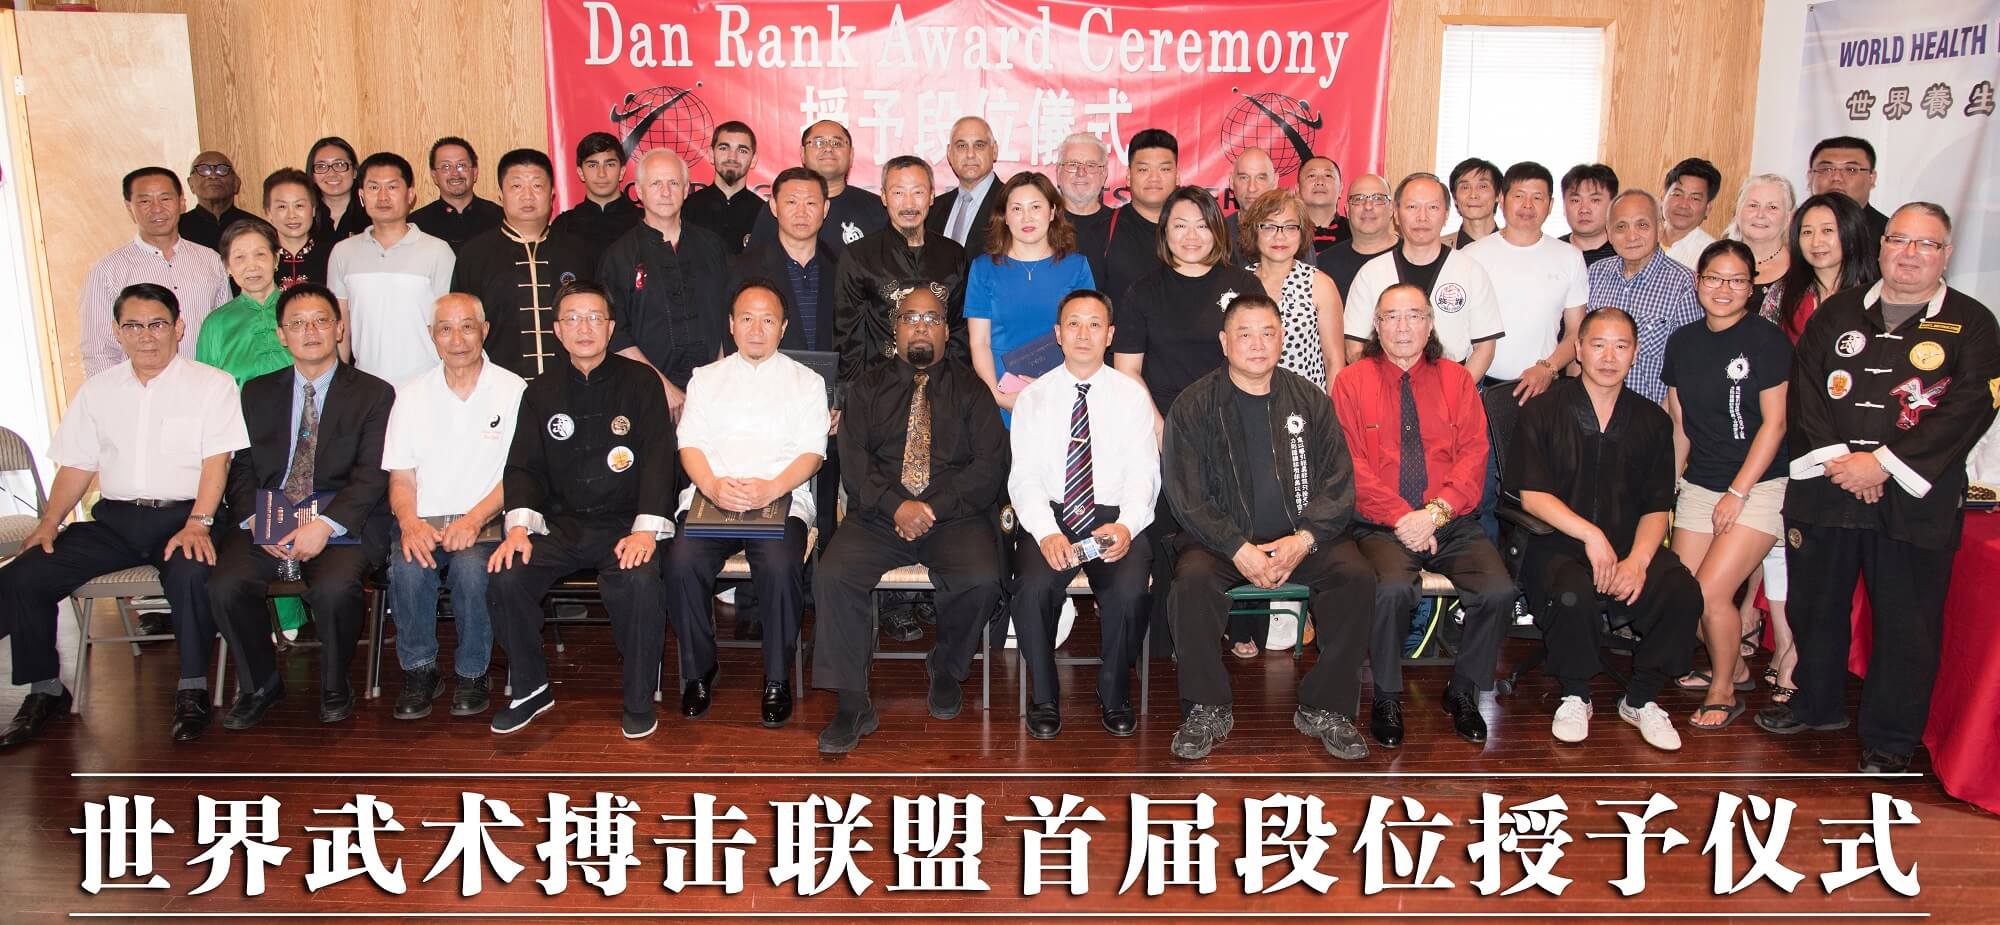 Dan rank award ceremony organized by the WFMAF with attendance of worldwide renowned martial arts masters.